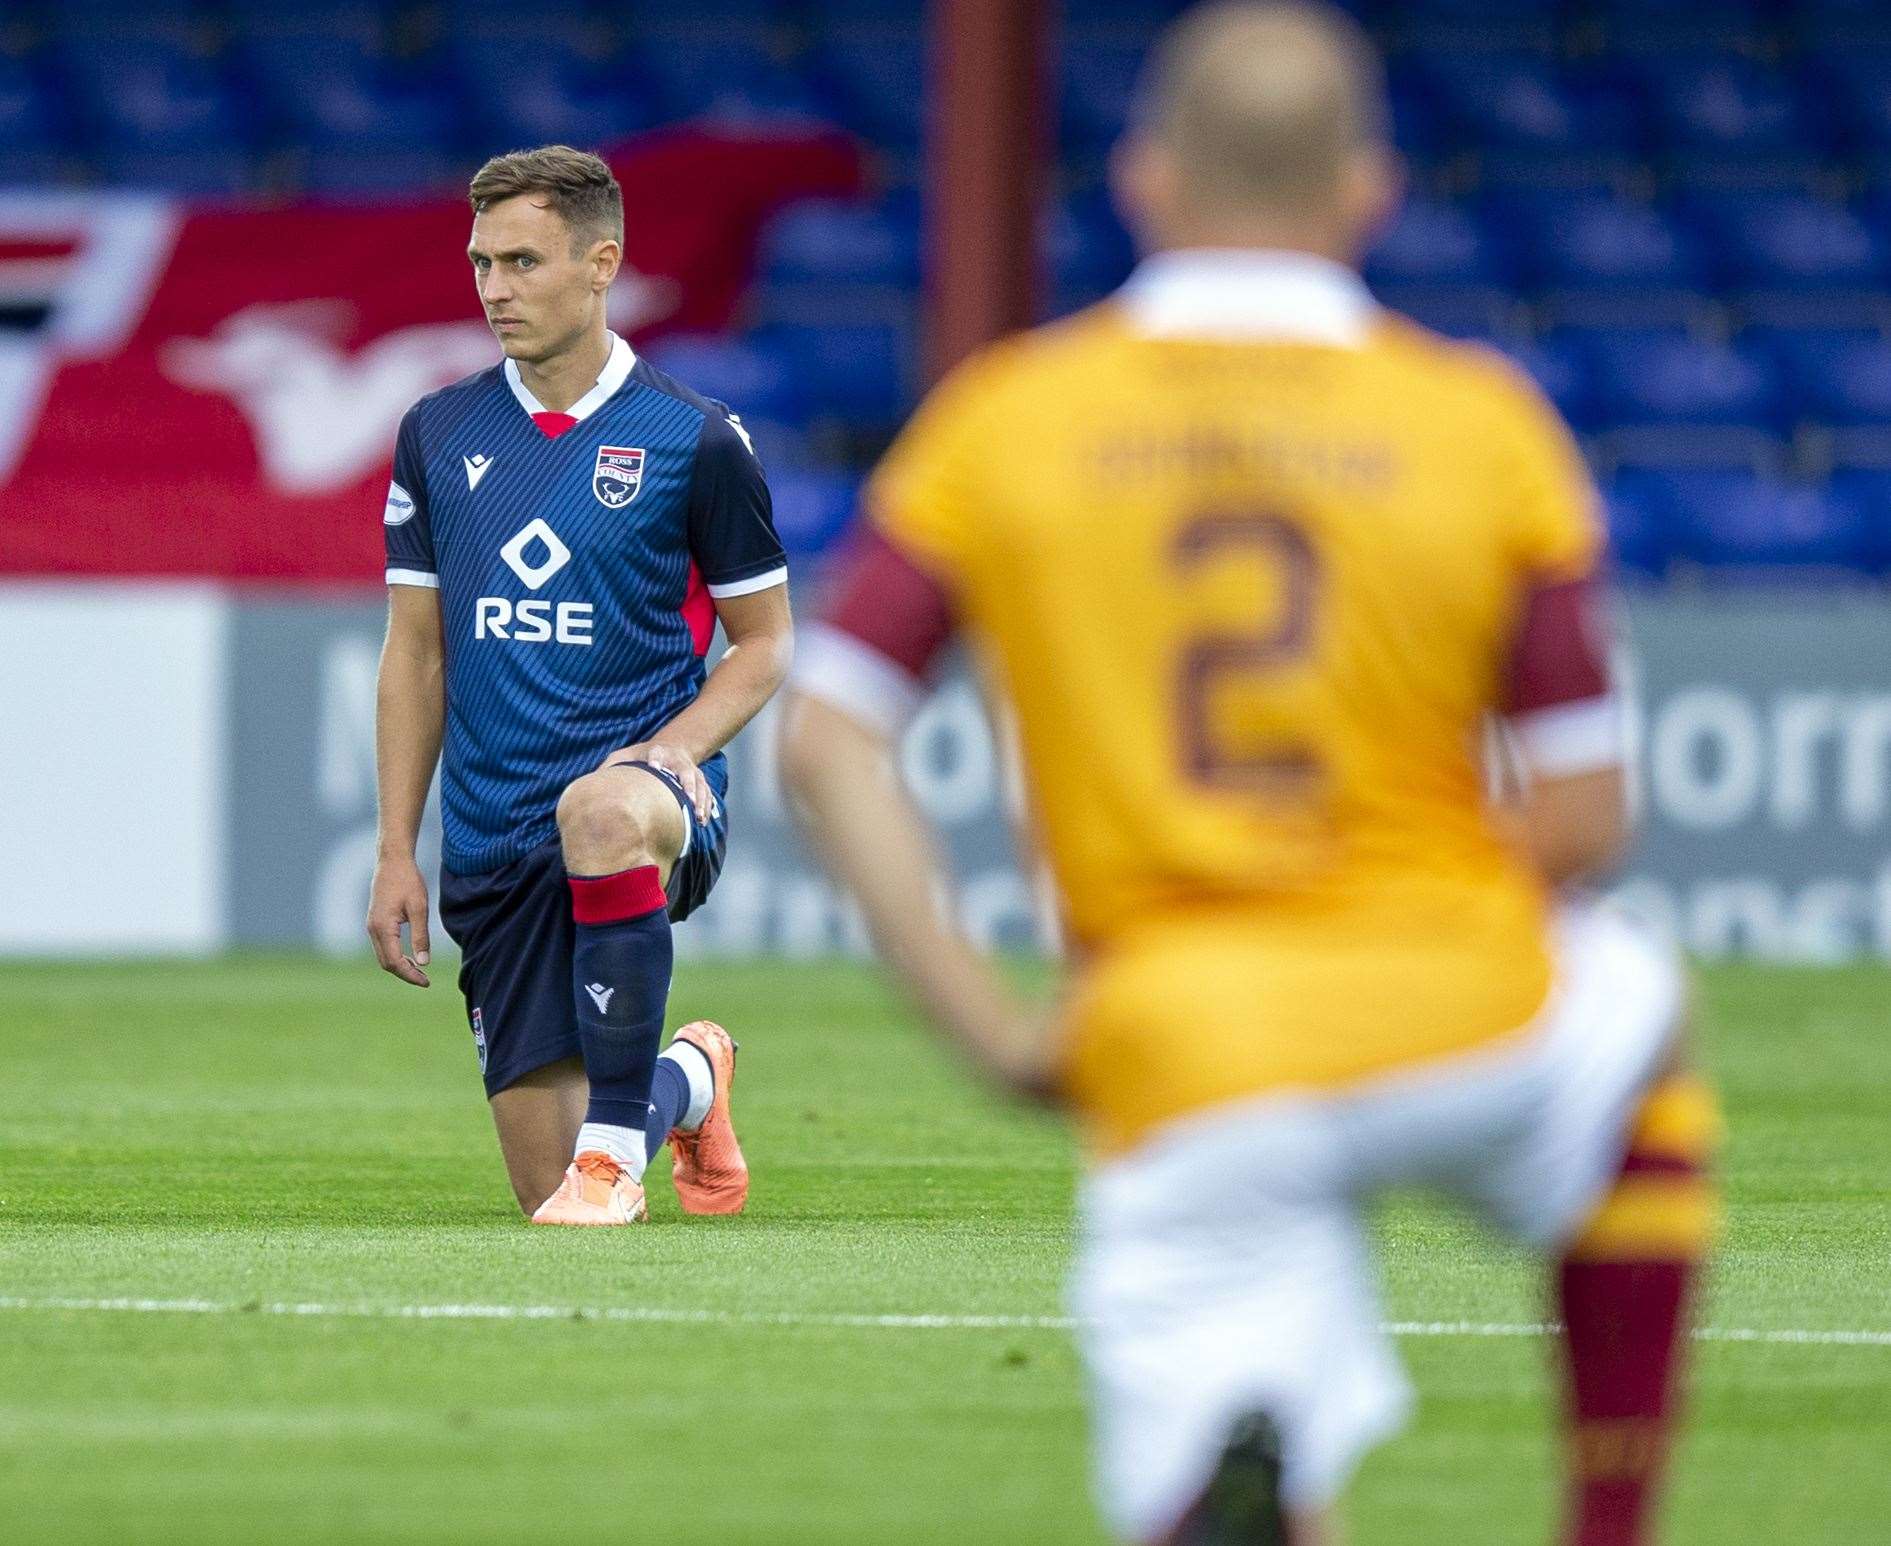 Top professionals in Scotland have taken the knee against racism generally in sport and are now focussing their campaign on prevalent social media discrimination and abuse. Here, Ross County's Jordan Tillson makes the gesture ahead of a match against Motherwell. Picture: Ken Macpherson.